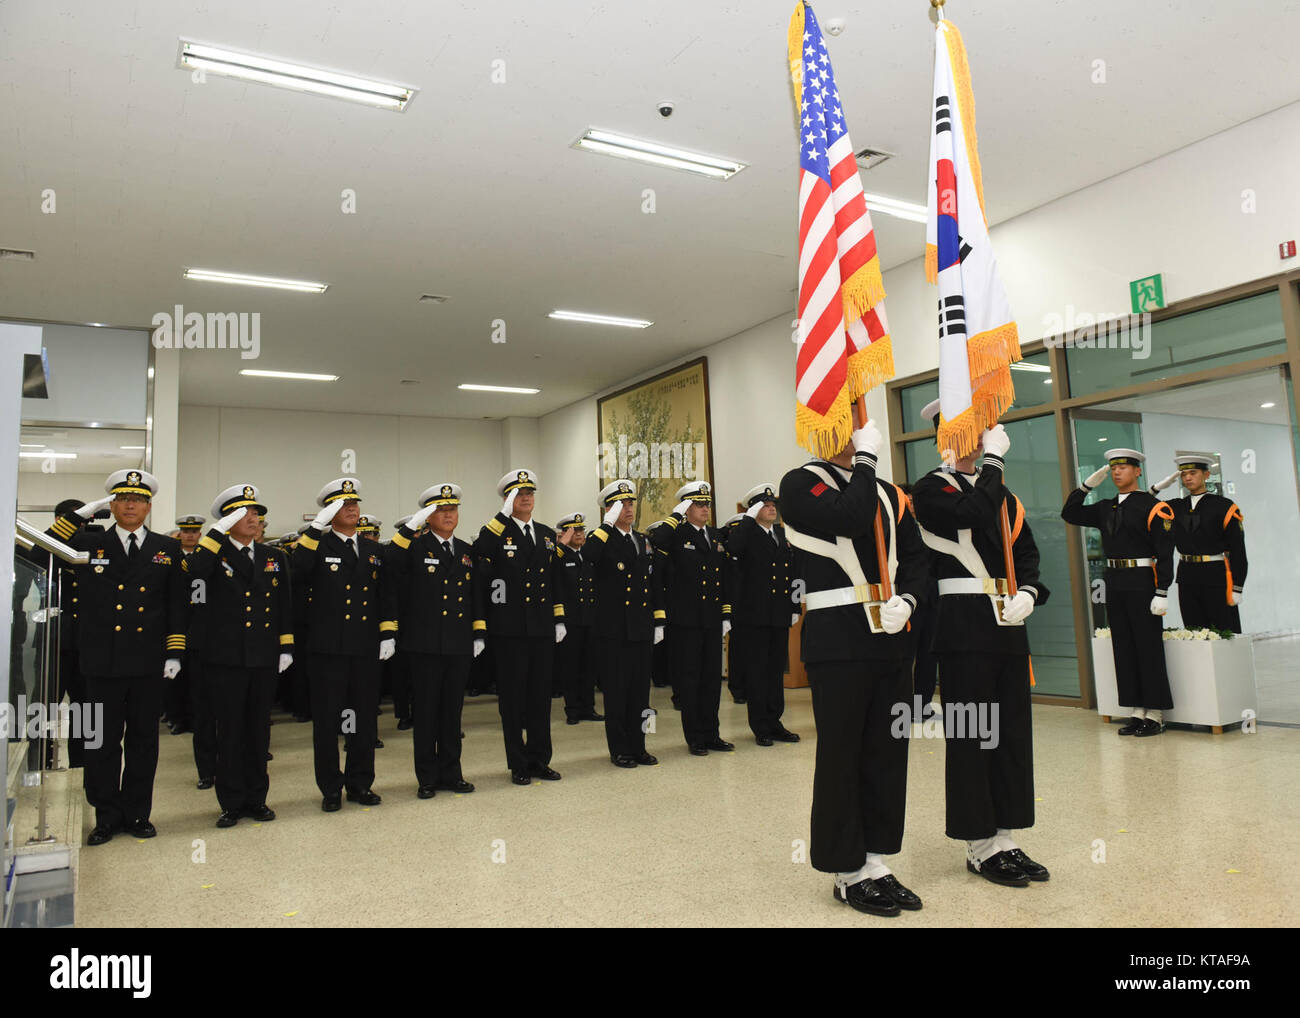 CHINHAE, Republic of Korea (Dec. 07, 2017) Rear Adm. Brad Cooper, commander, U.S. Naval Forces Korea (CNFK), attends the unveiling of the Capt. Michael Lousey memorial bust unveiling ceremony at Republic of Korea (ROK) Naval Academy in Chinhae. CNFK is the U.S. Navy’s representative in the ROK, providing leadership and expertise in naval matters to improve institutional and operational effectiveness between the two navies and to strengthen collective security efforts in Korea and the region. (U.S. Navy Stock Photo